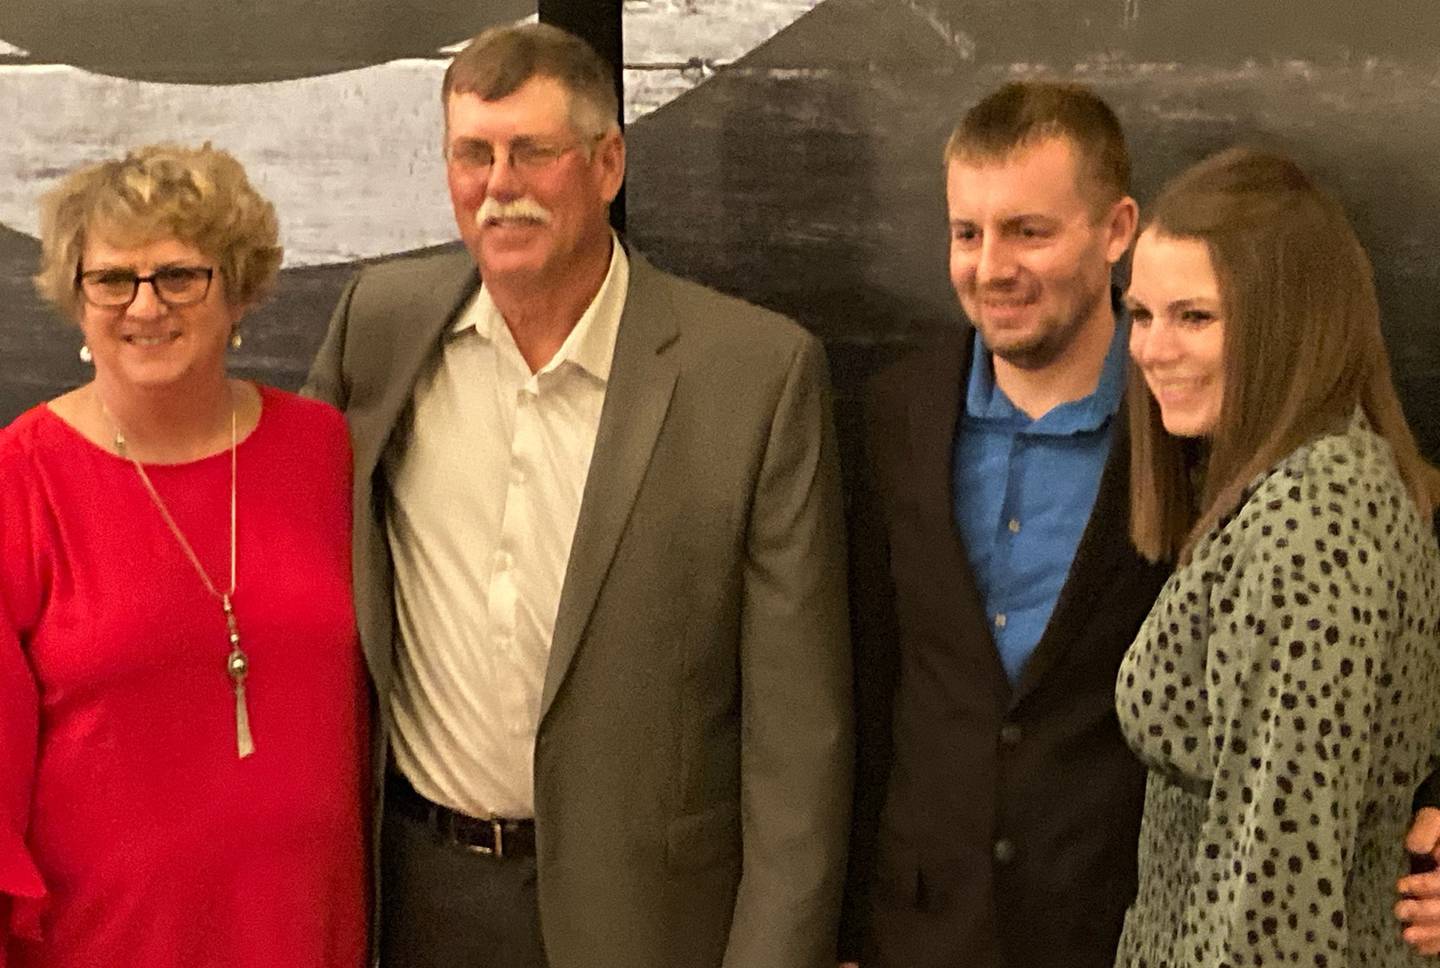 The Mitchell Family members, from left, Jeanne Mitchell, Doug Mitchell, Brandon DeWitt and Whitney Mitchell-DeWitt.